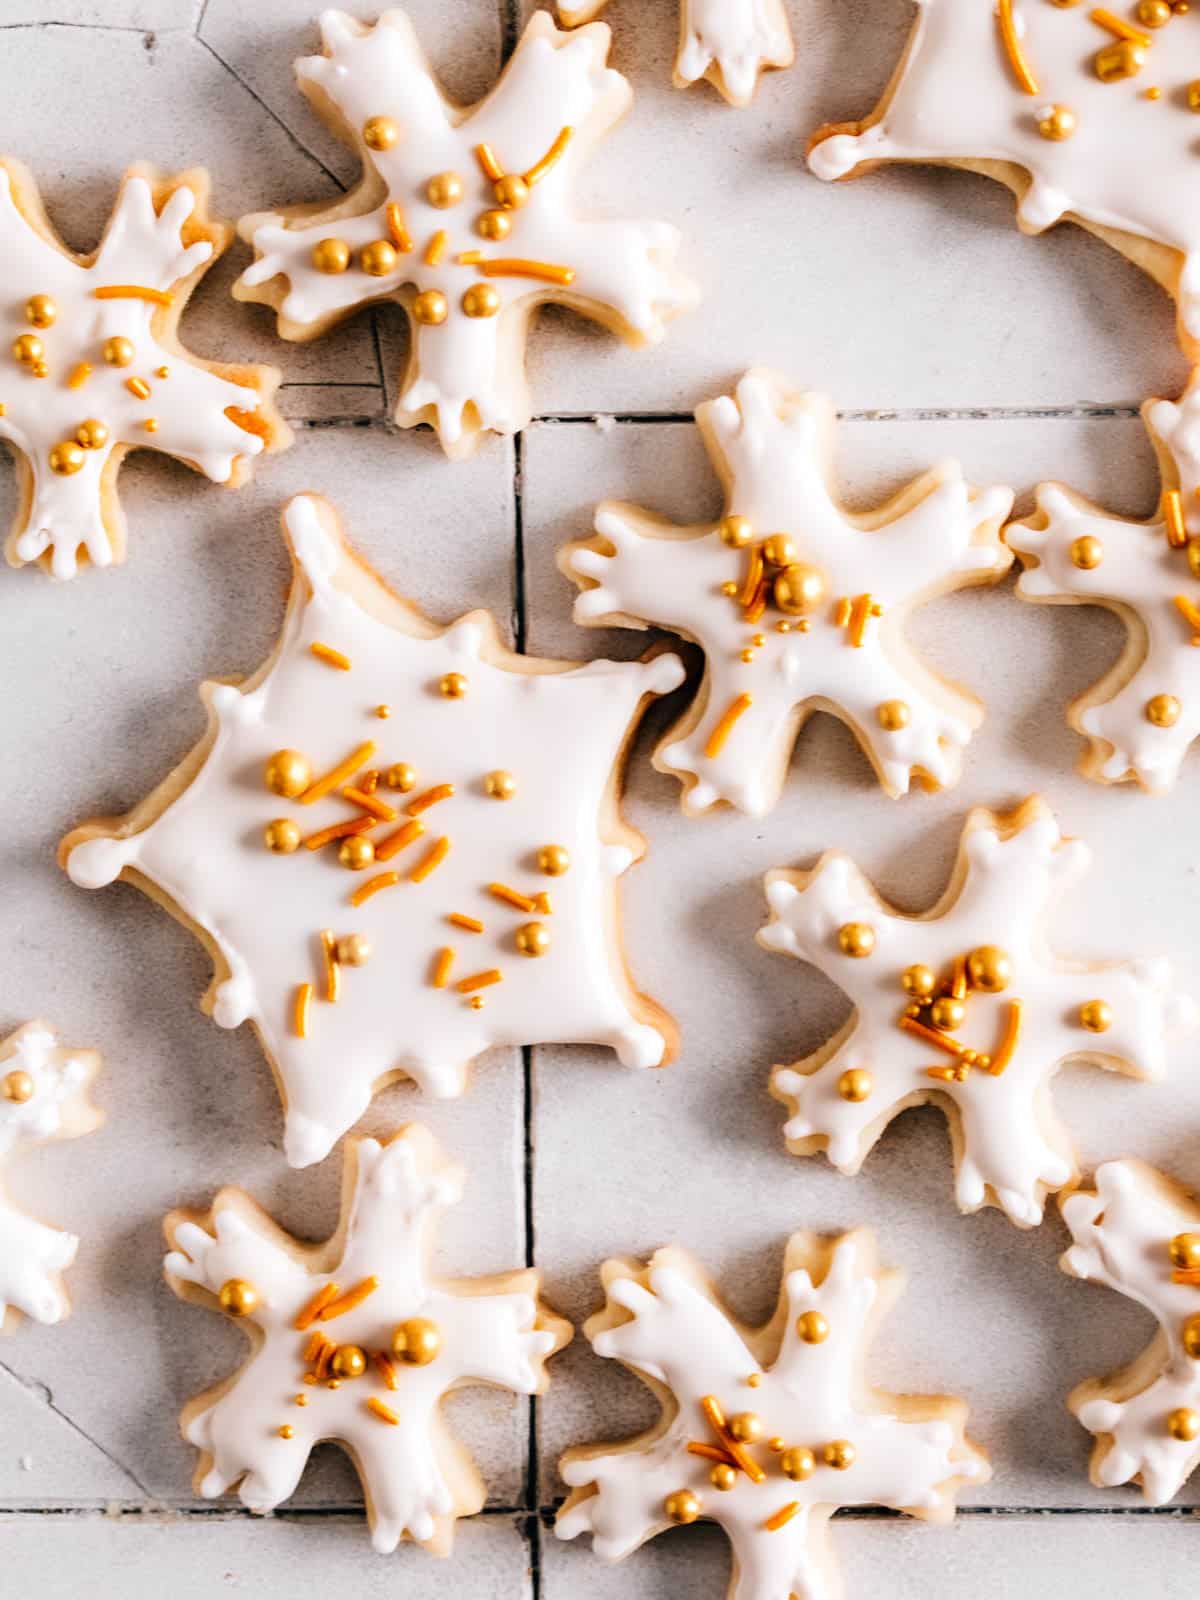 Snowflake cookies with royal icing and sprinkles on a table.